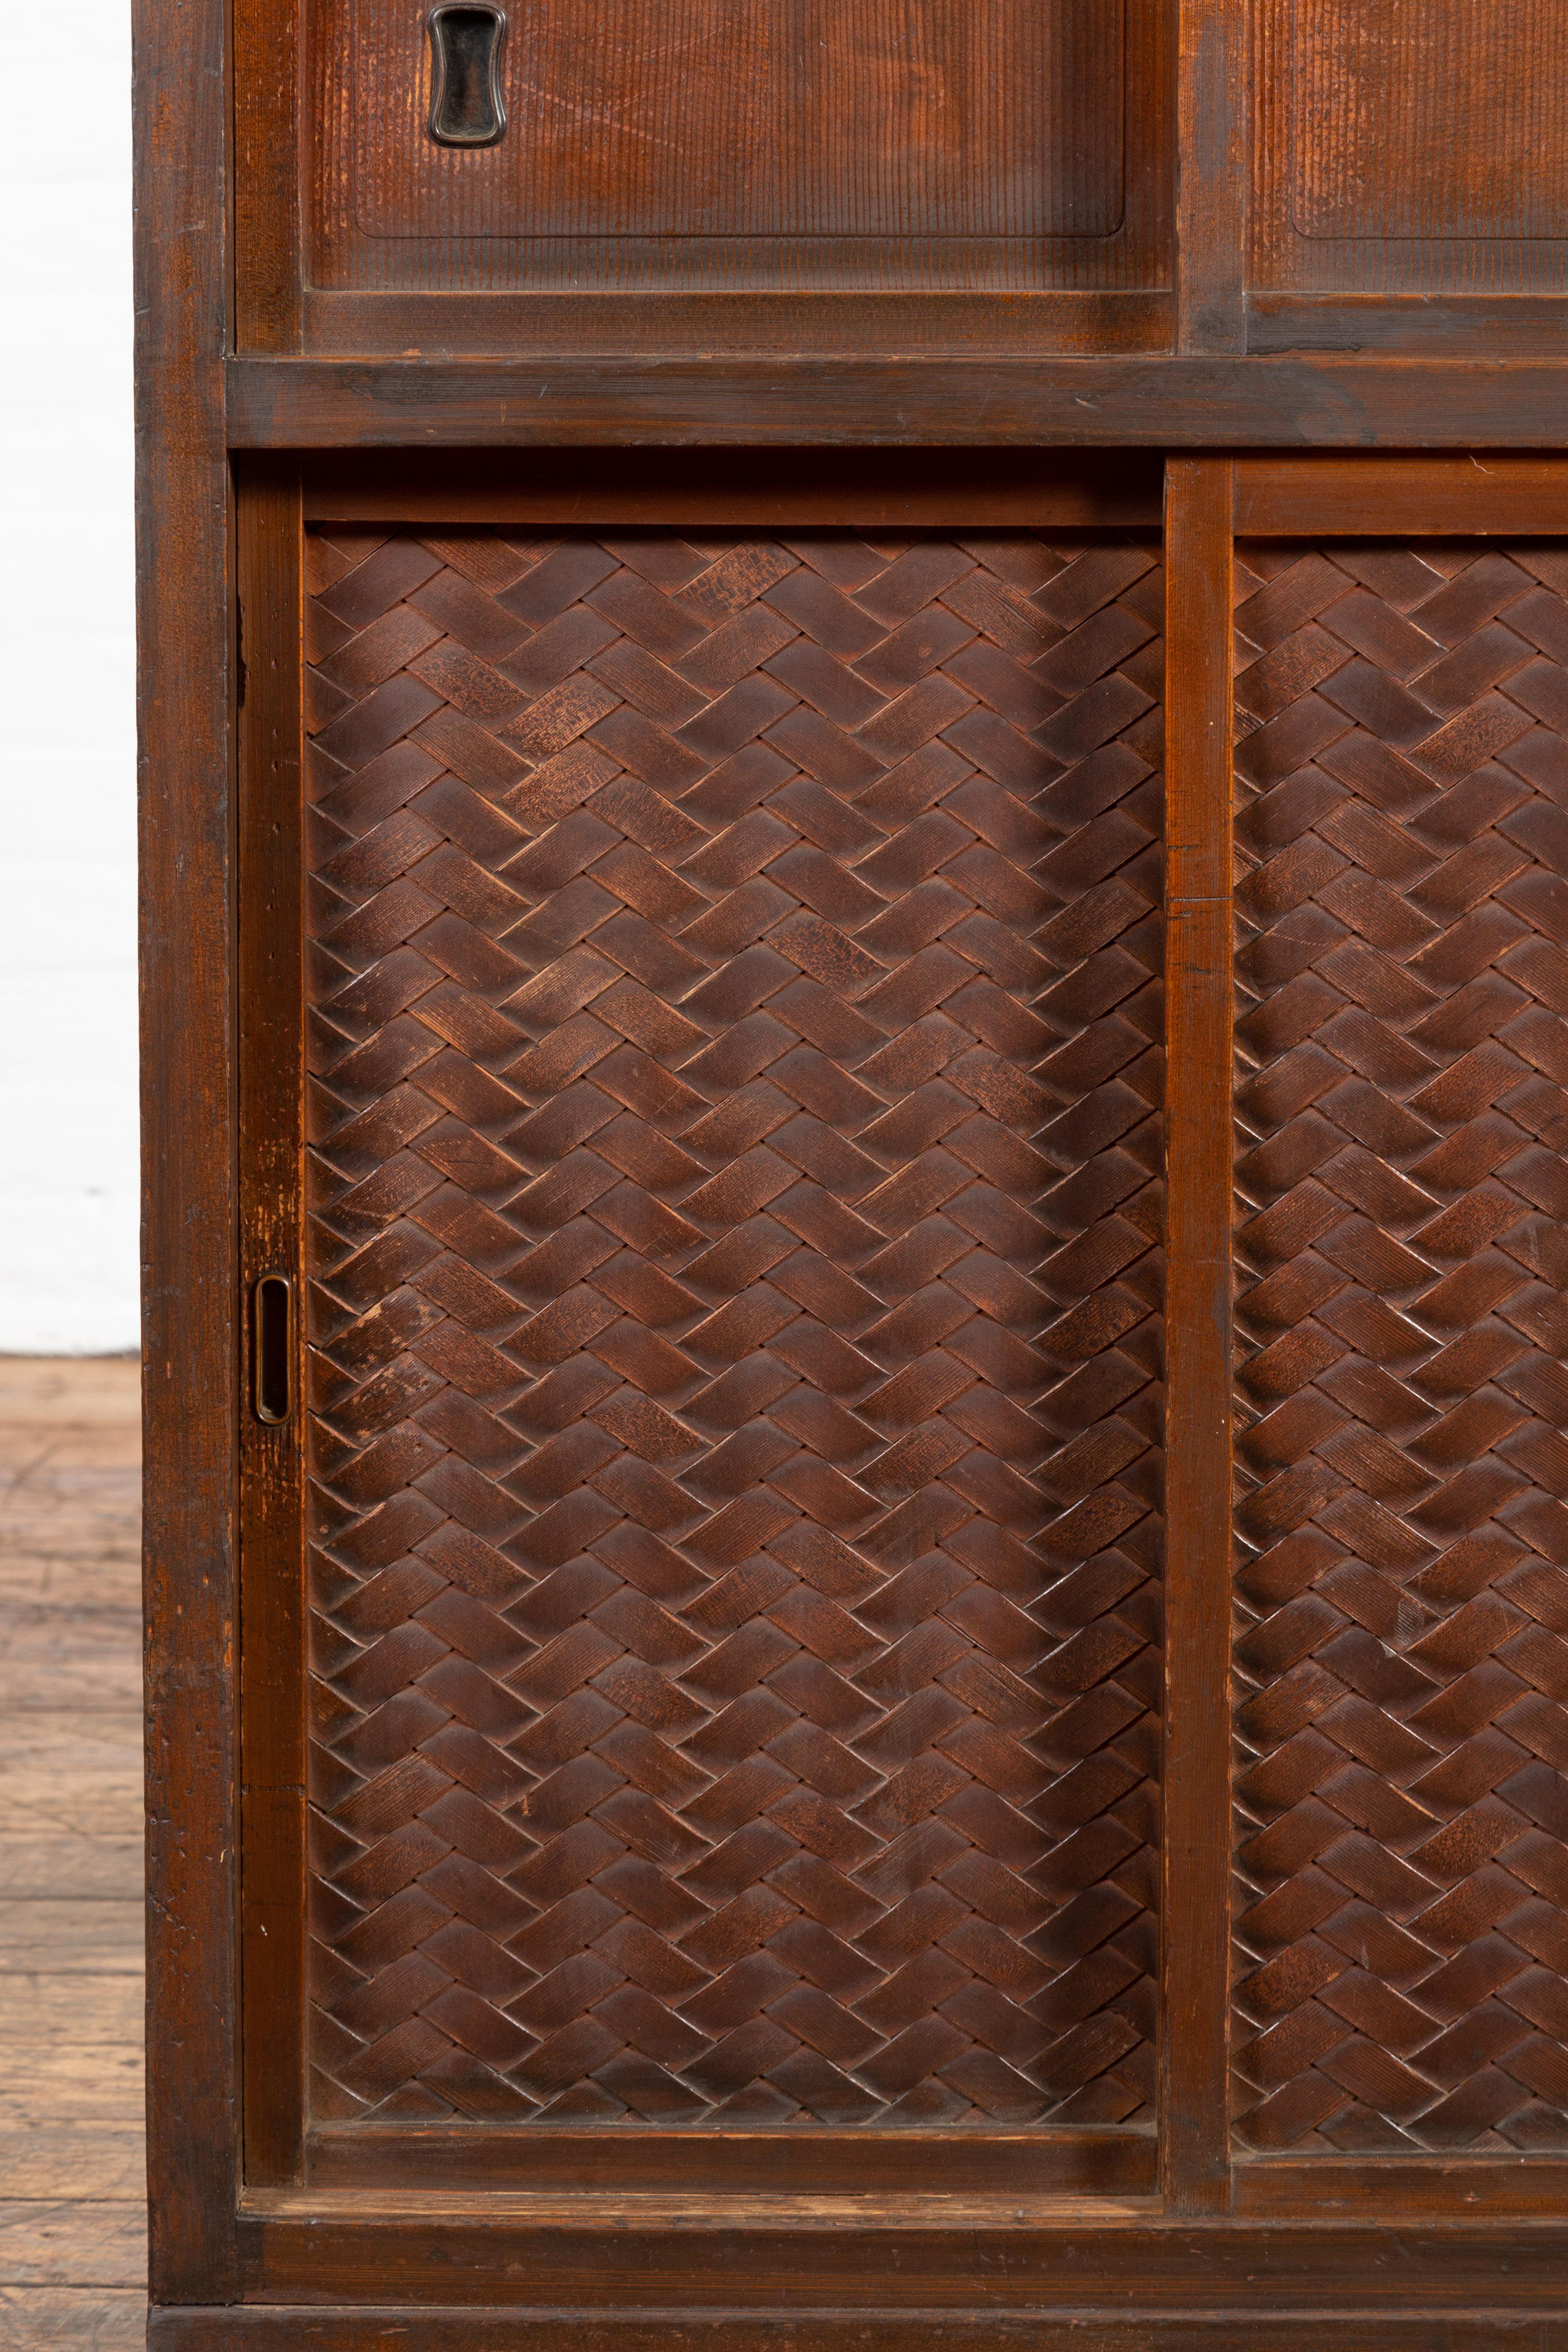 Japanese 19th Century Cabinet with Sliding Doors and Woven Criss-Cross Design 1